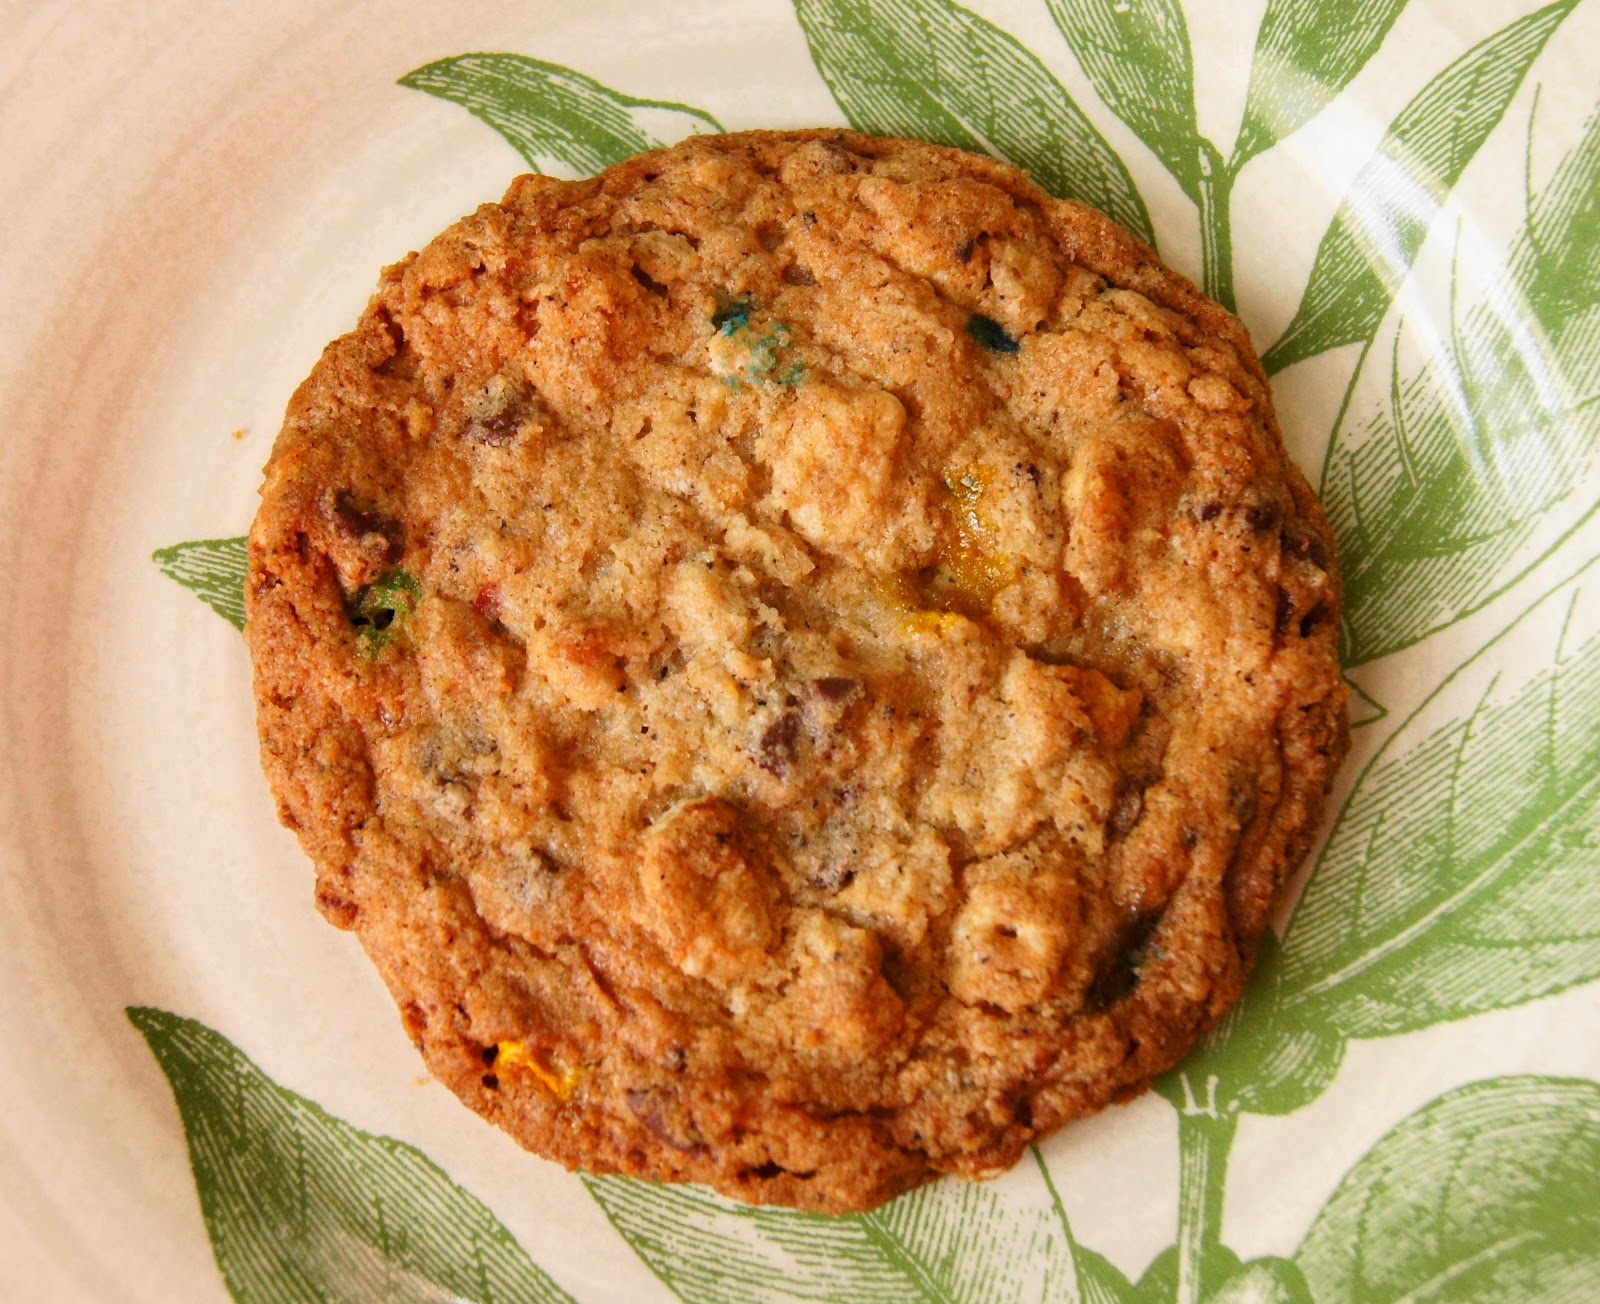 They're Magically Delicious!: Compost Cookies 3.0